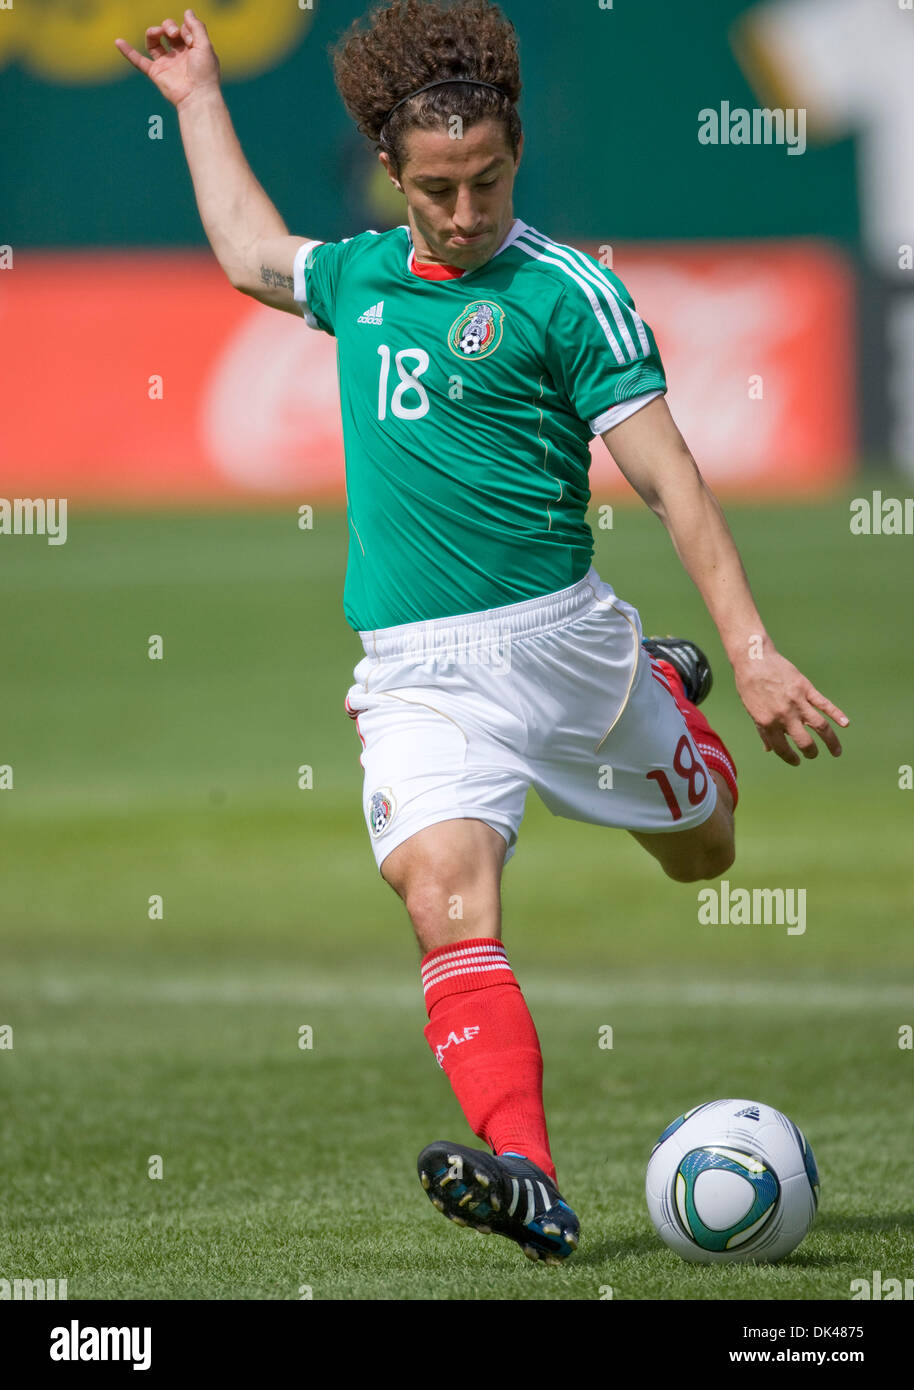 Mar. 26, 2011 - Oakland, California, U.S. - Midfielder ANDRES GUARDADO #18 during play action at the FIFA friendly match between Mexico and Paraguay. (Credit Image: © William Mancebo/ZUMAPRESS.com) Stock Photo